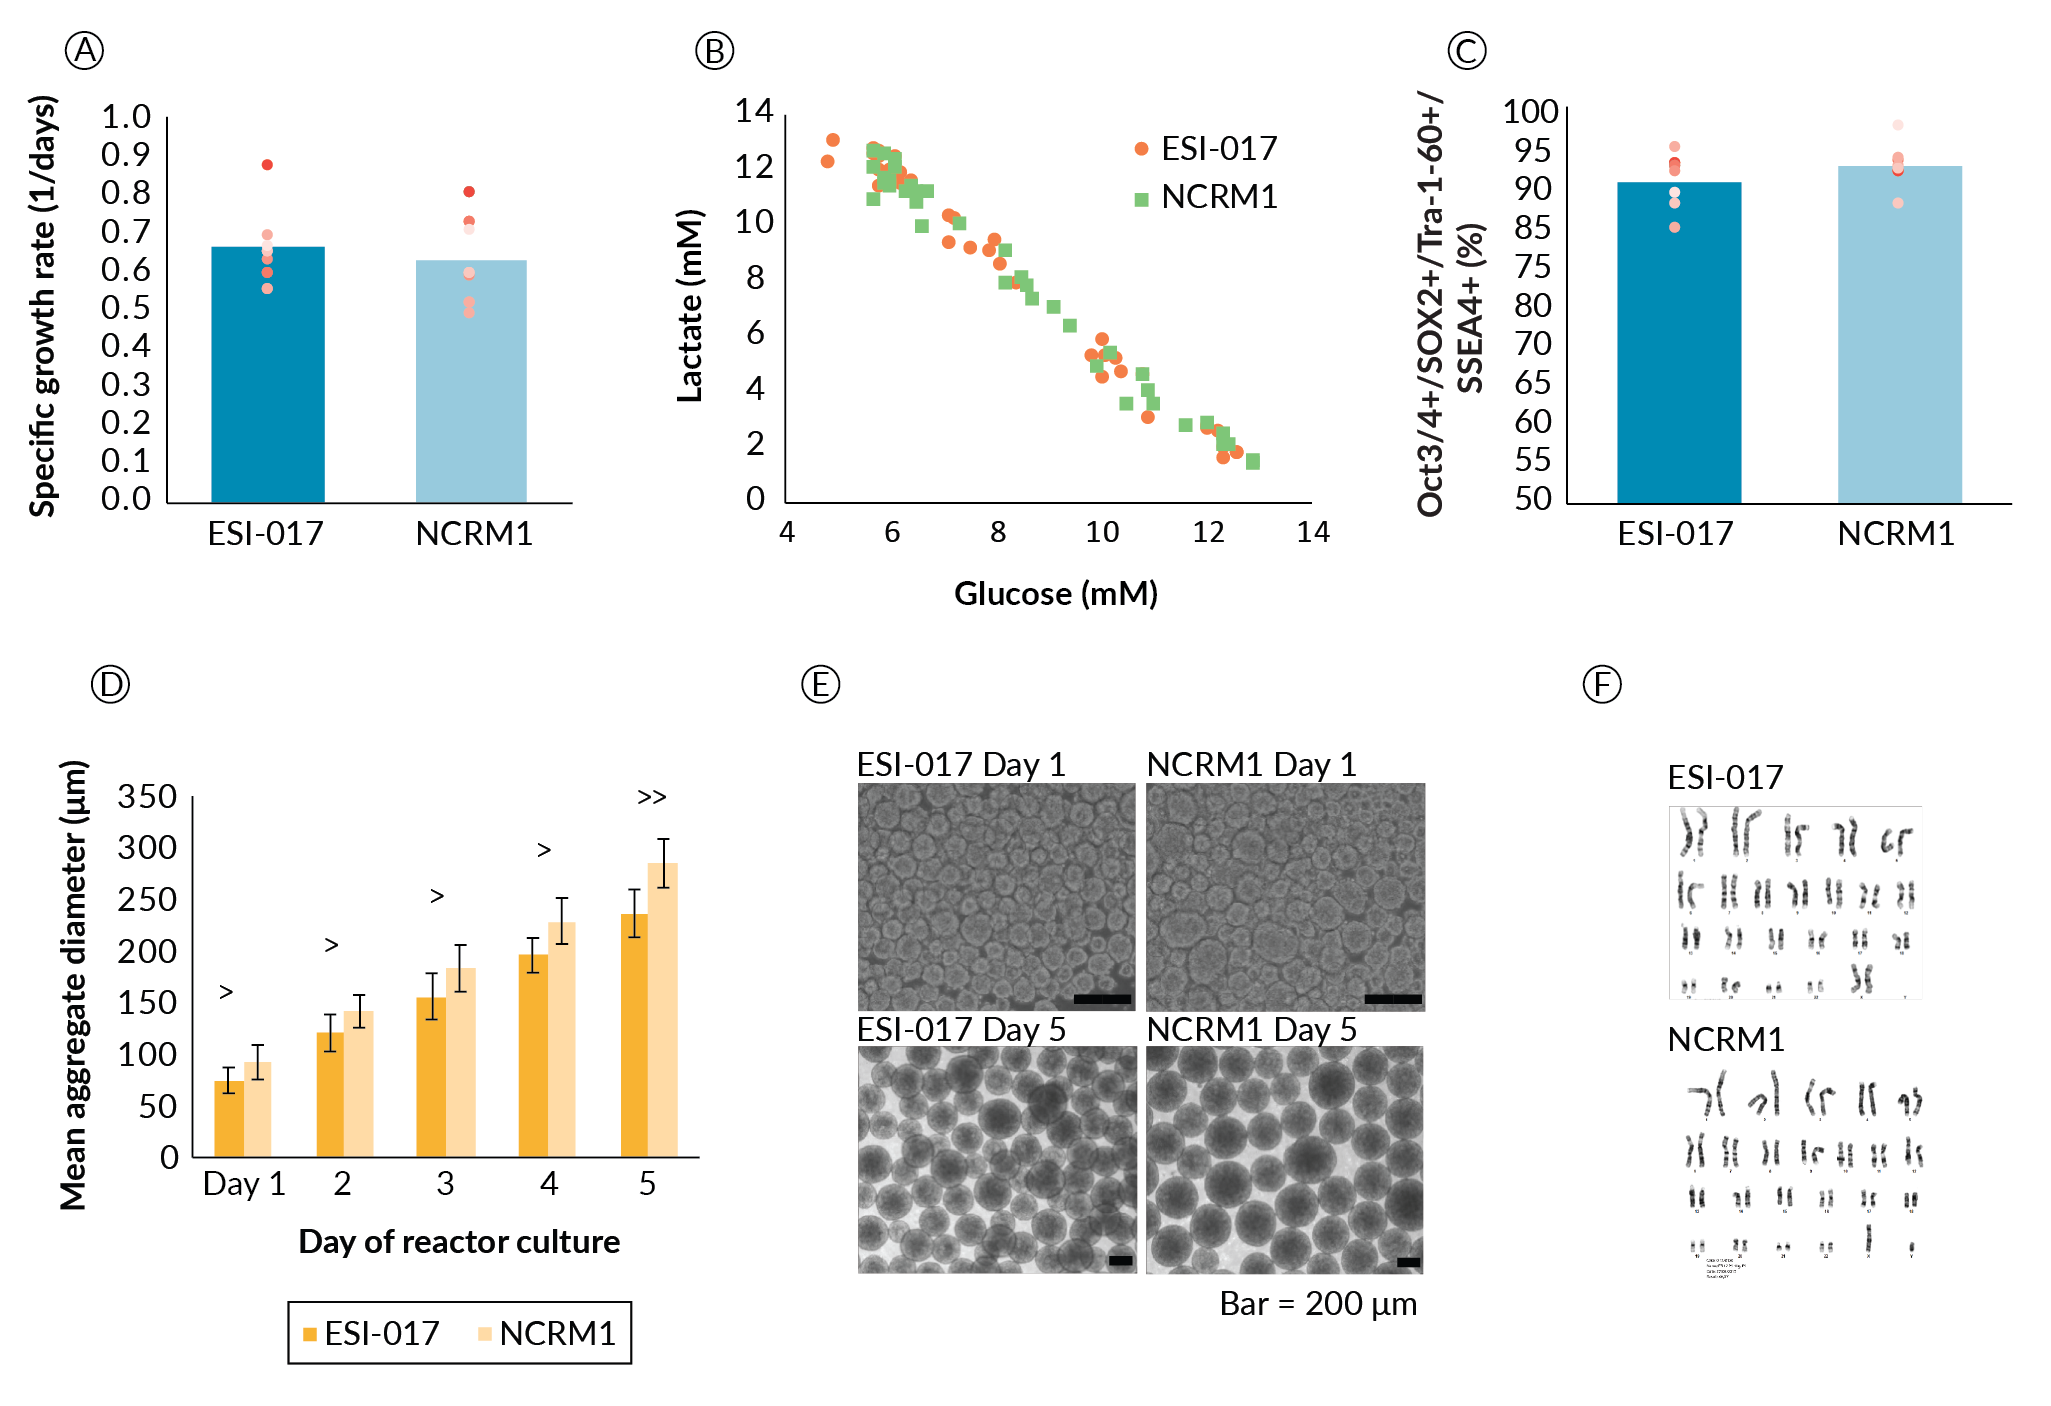 Gentle Cell Dissociation Reagent for Human ES/iPS Cells